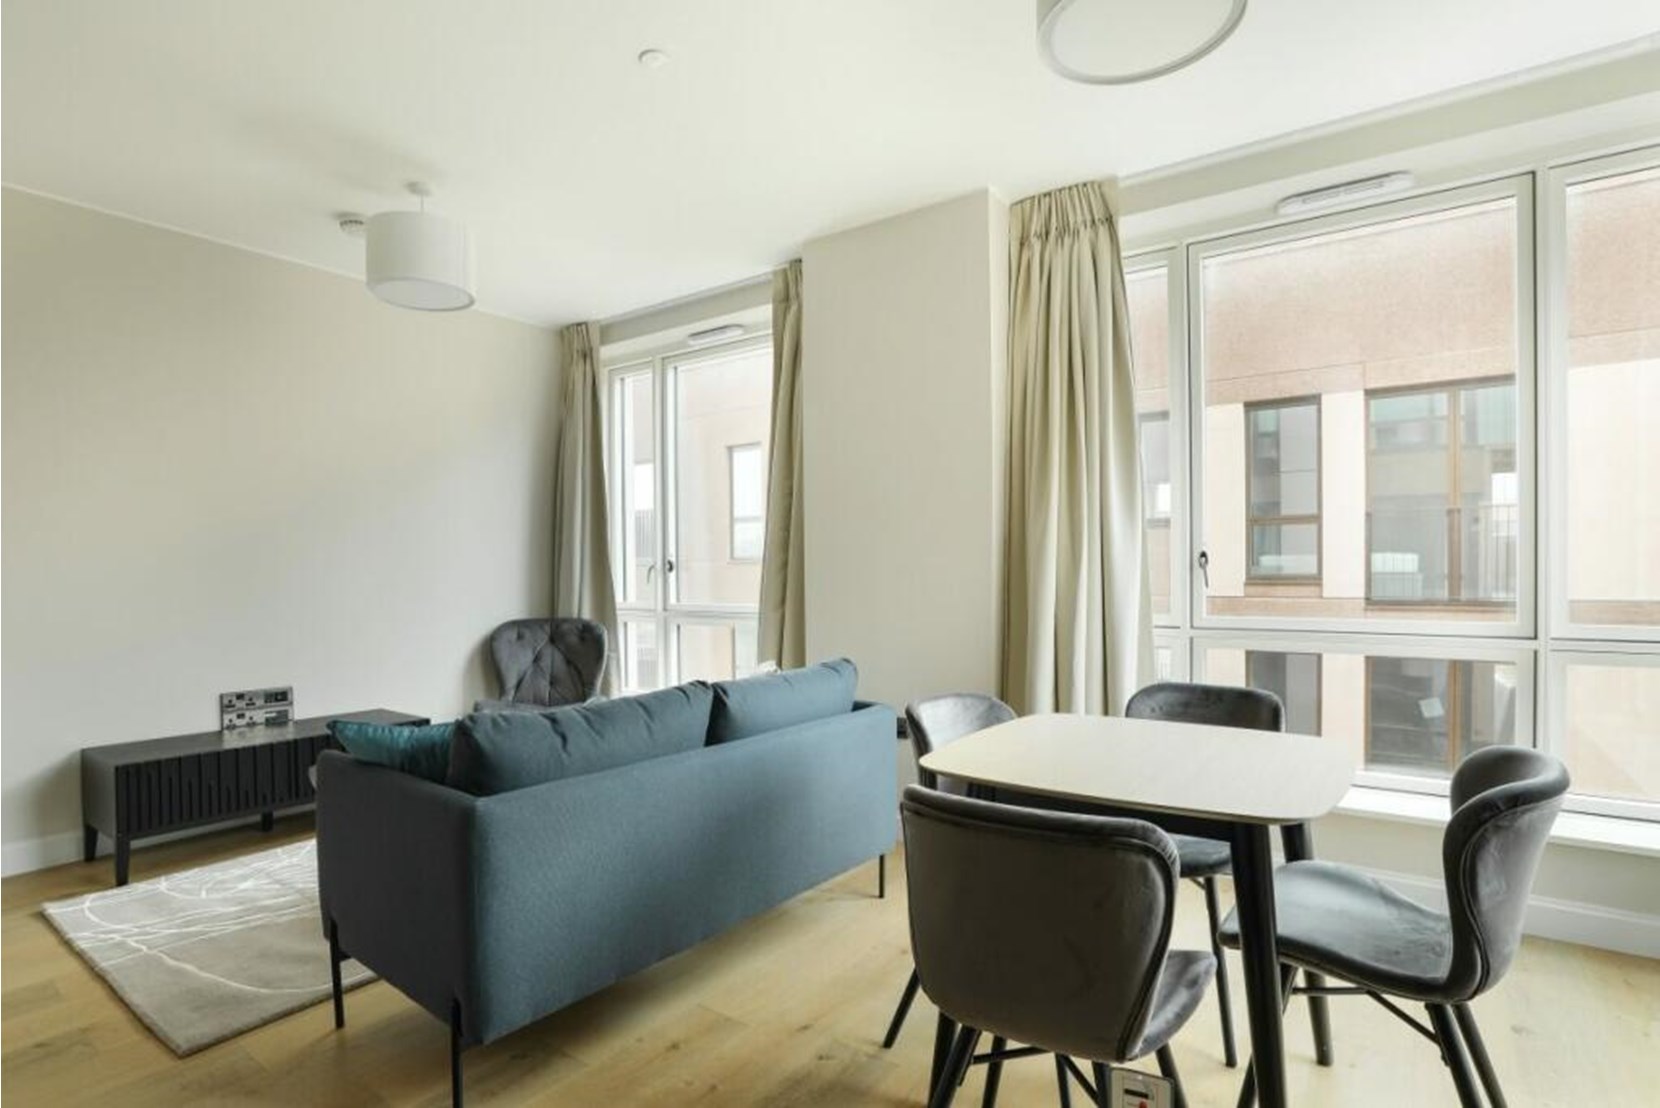 Houses and Apartments to Rent by JLL at Sugar House Island, Newham, E15, living dining area